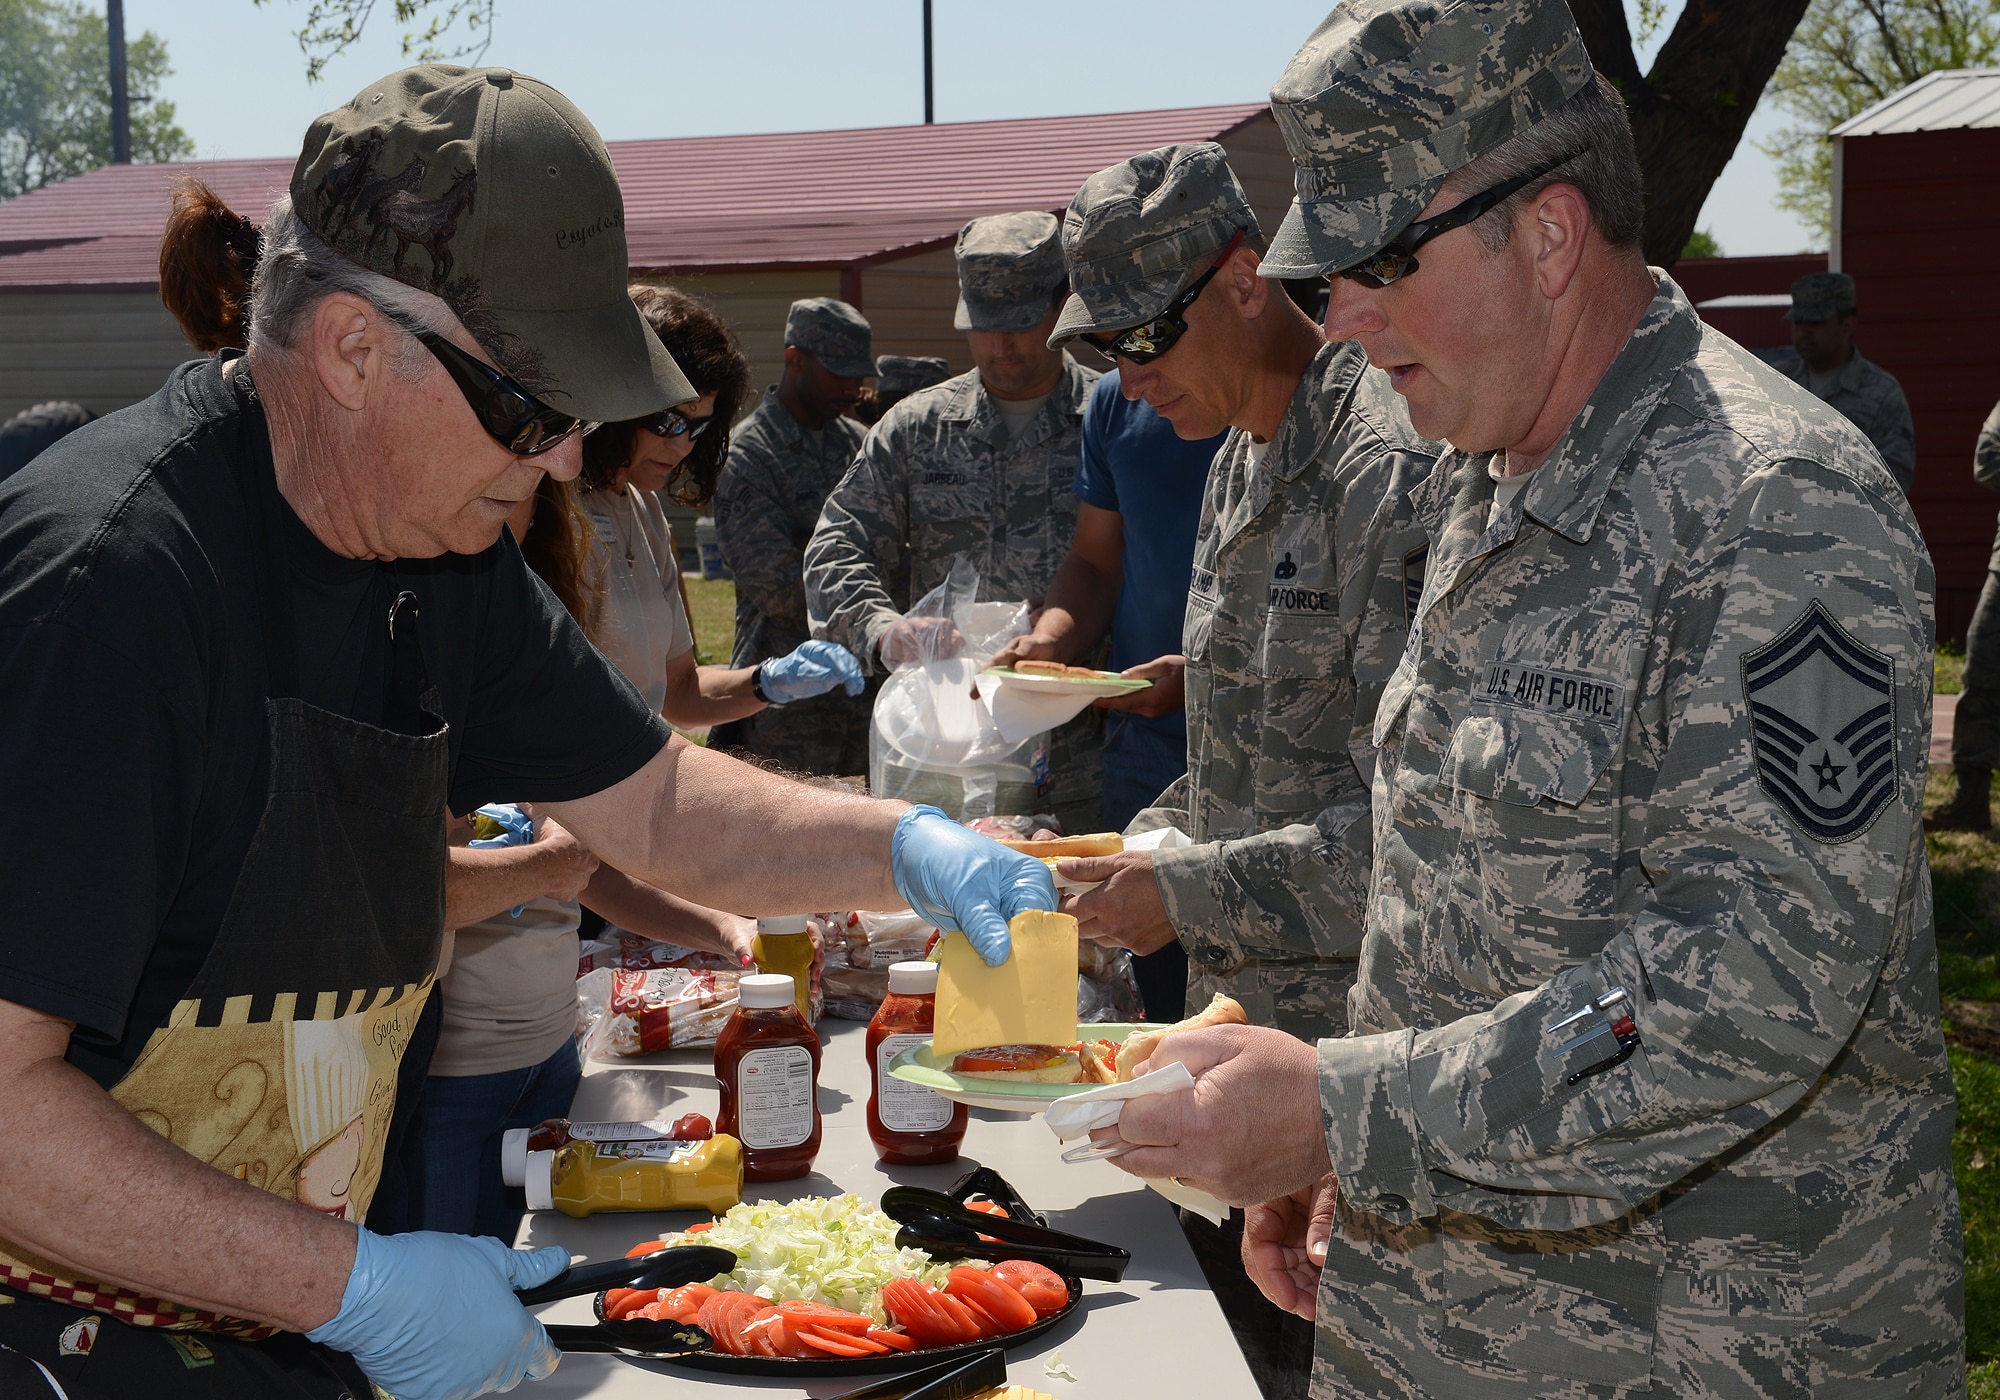 Master Sergeant Don Herbert (Ret.) serves Senior Master Sergeant Eric Erler during an Earth Day celebration at the 138th Fighter Wing, 22 April 2014.  The 138th FW Environmental Management office organized a cookout and other green activities to celebrate the day at the Tulsa Air National Guard base, Tulsa Okla.  (U.S. National Guard photo by Senior Master Sgt.  Preston L. Chasteen/Released)